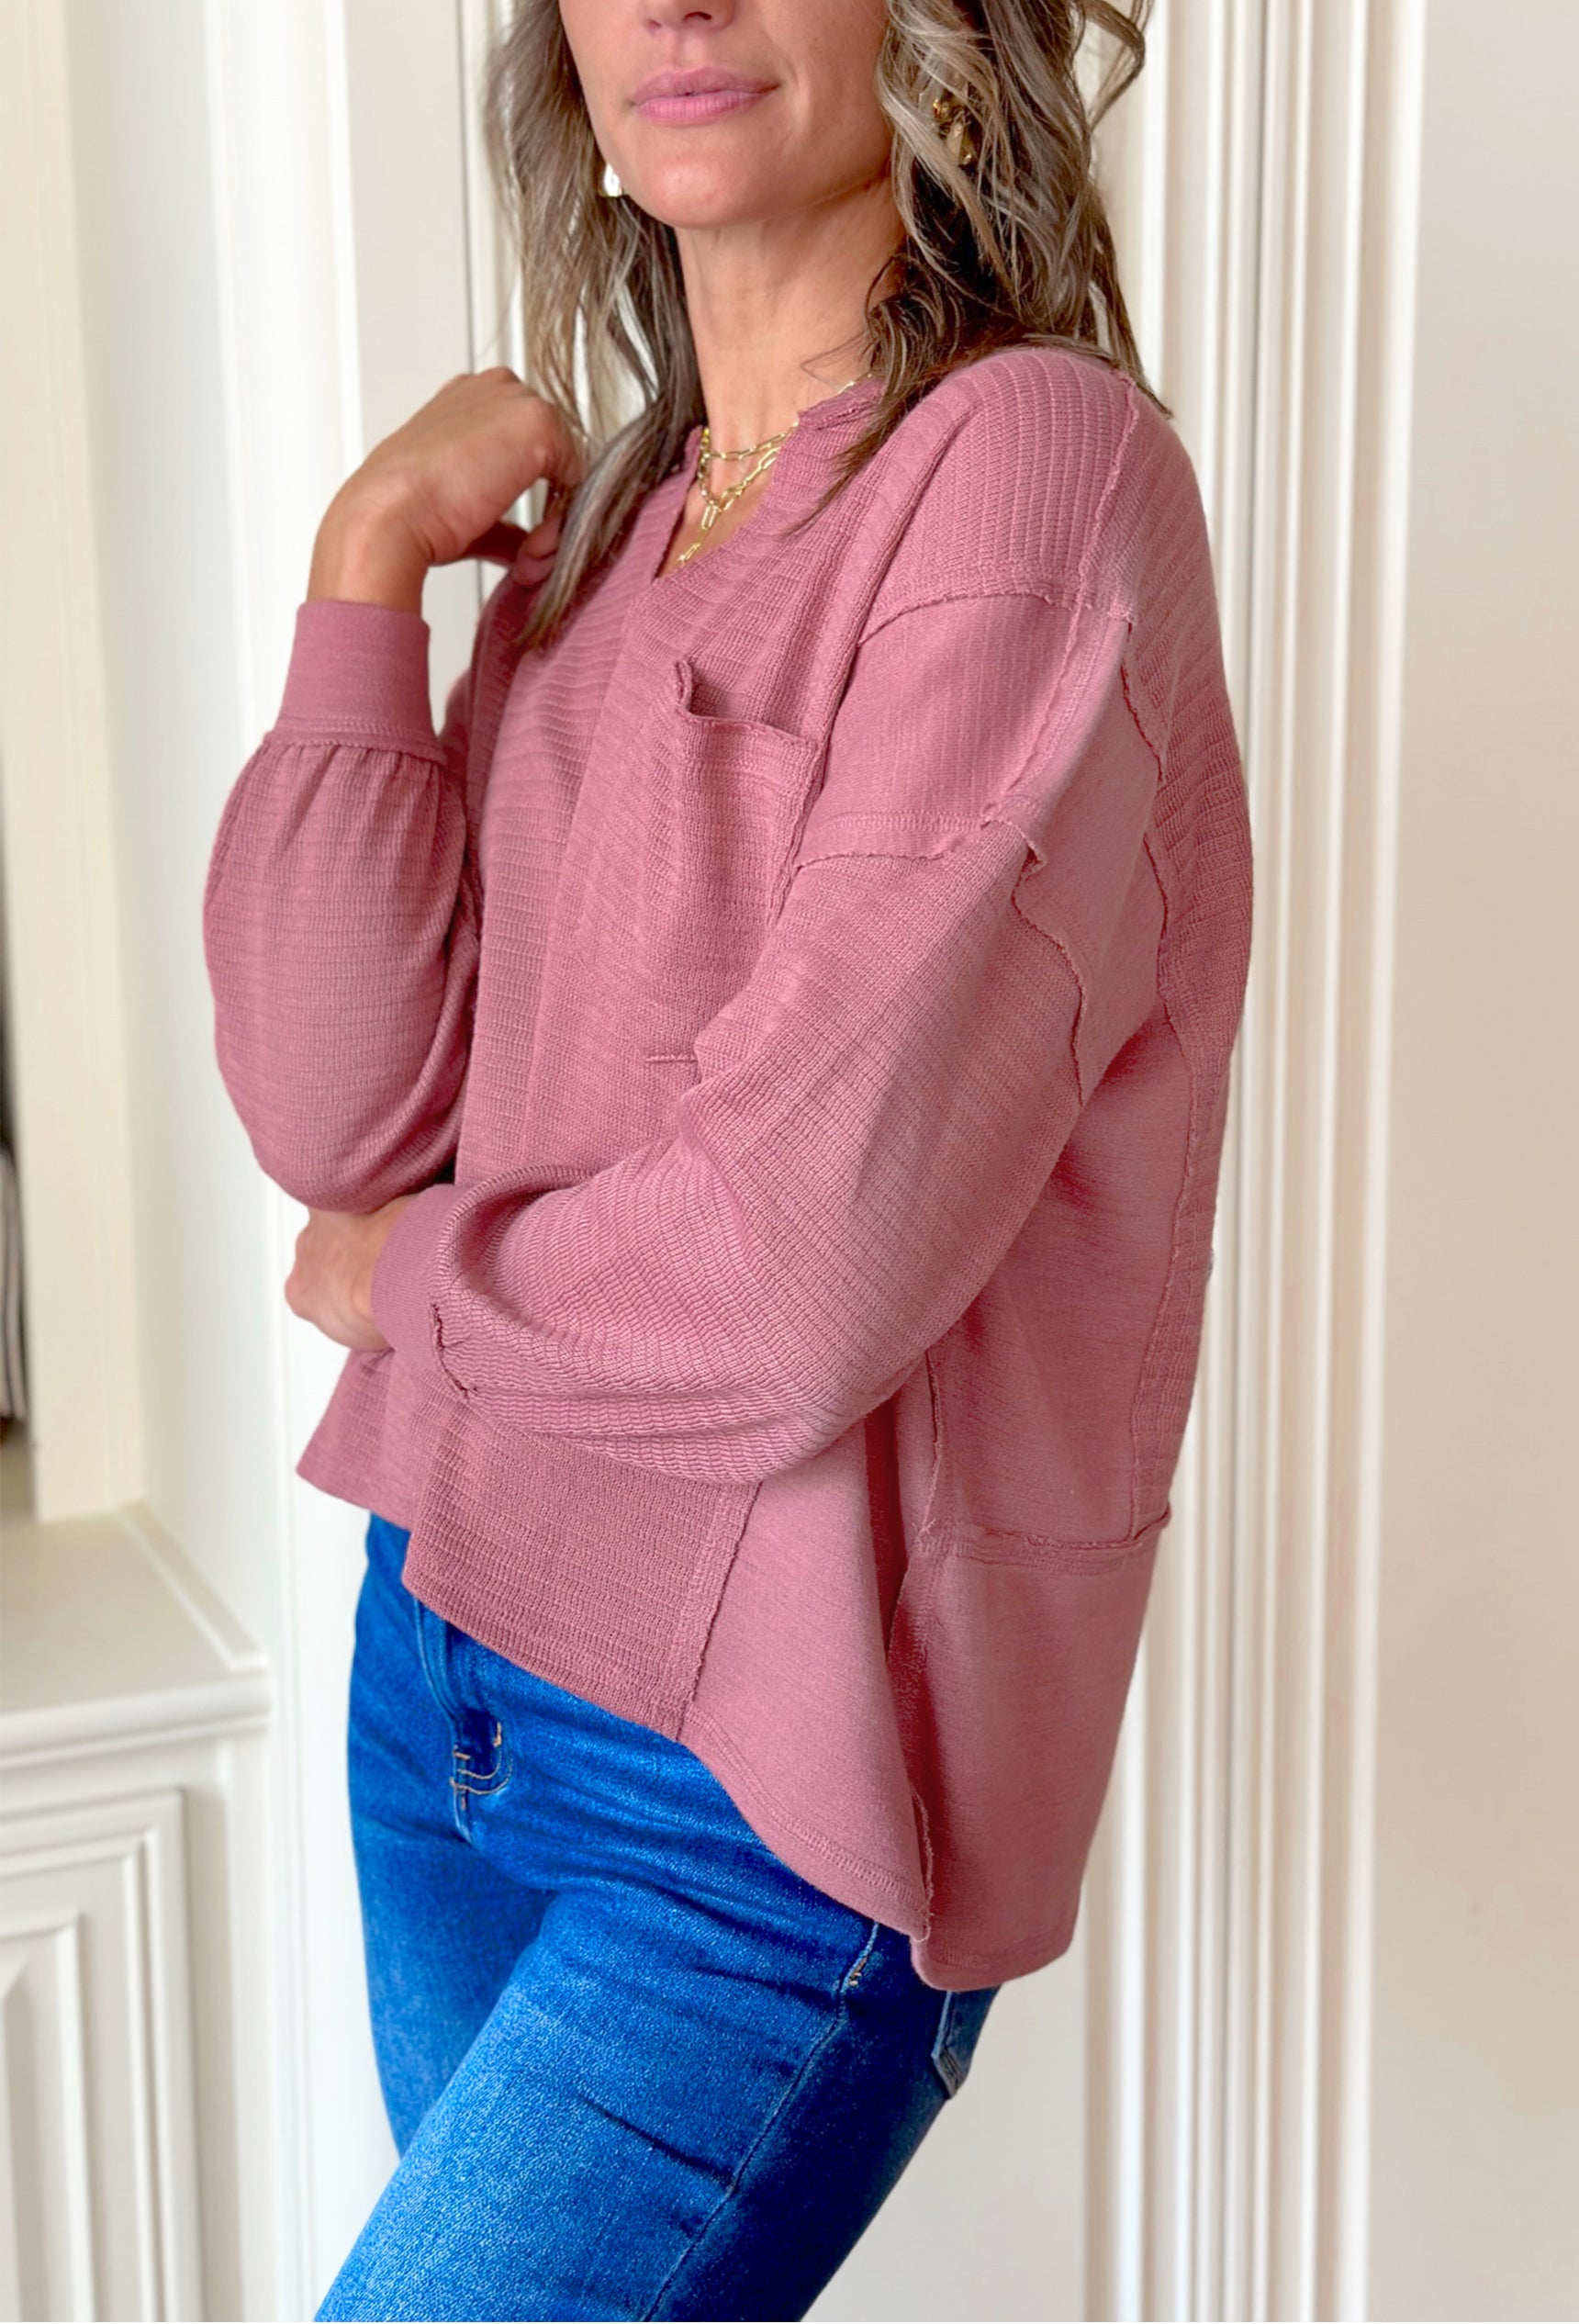 Chilly Morning Top in Dusty Rose, long sleeve top with front pocket and soft v-neck